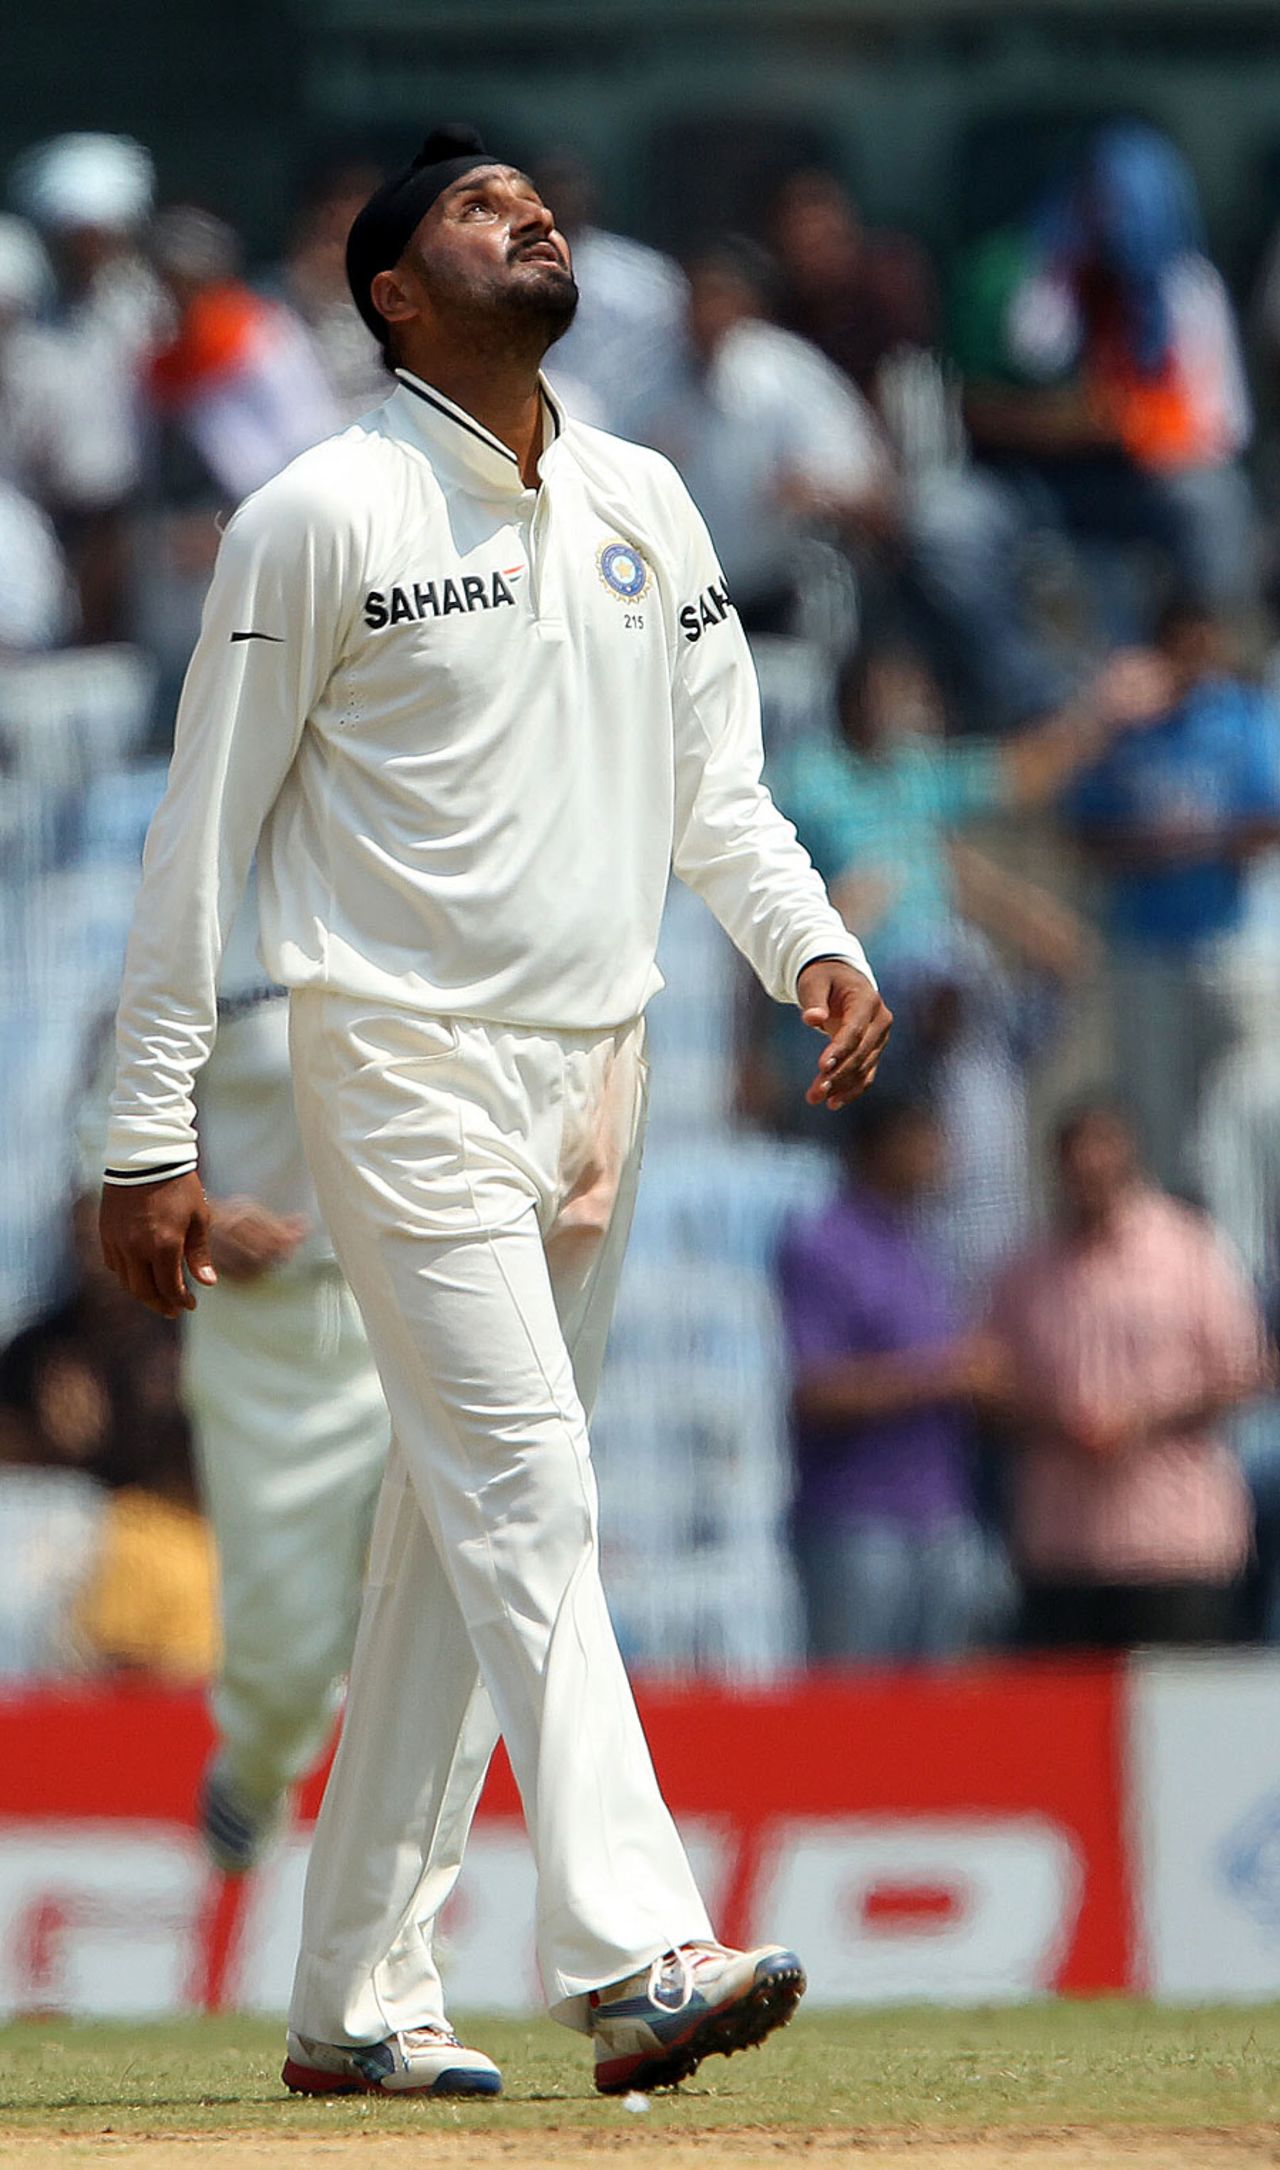 Harbhajan Singh is relieved after striking in his 24th over, India v Australia, 1st Test, Chennai, 2nd day, February 23, 2013